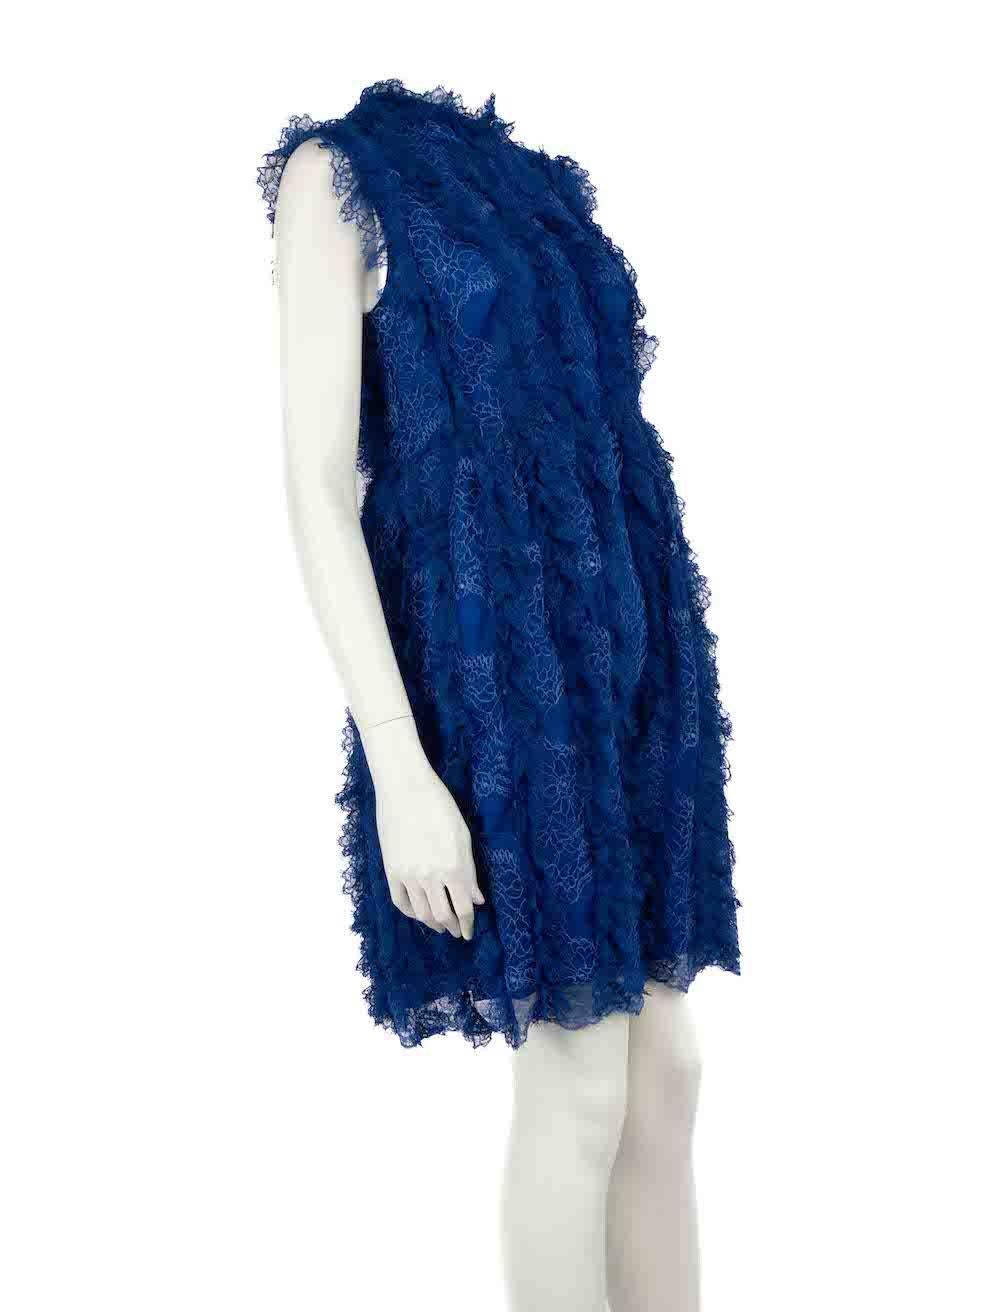 CONDITION is Very good. Hardly any visible wear to dress is evident on this used Givenchy designer resale item.
 
 
 
 Details
 
 
 Blue
 
 Viscose lace
 
 Dress
 
 Sleeveless
 
 Round neck
 
 Ruffled
 
 Mini
 
 Back zip and hook fastening
 
 
 
 
